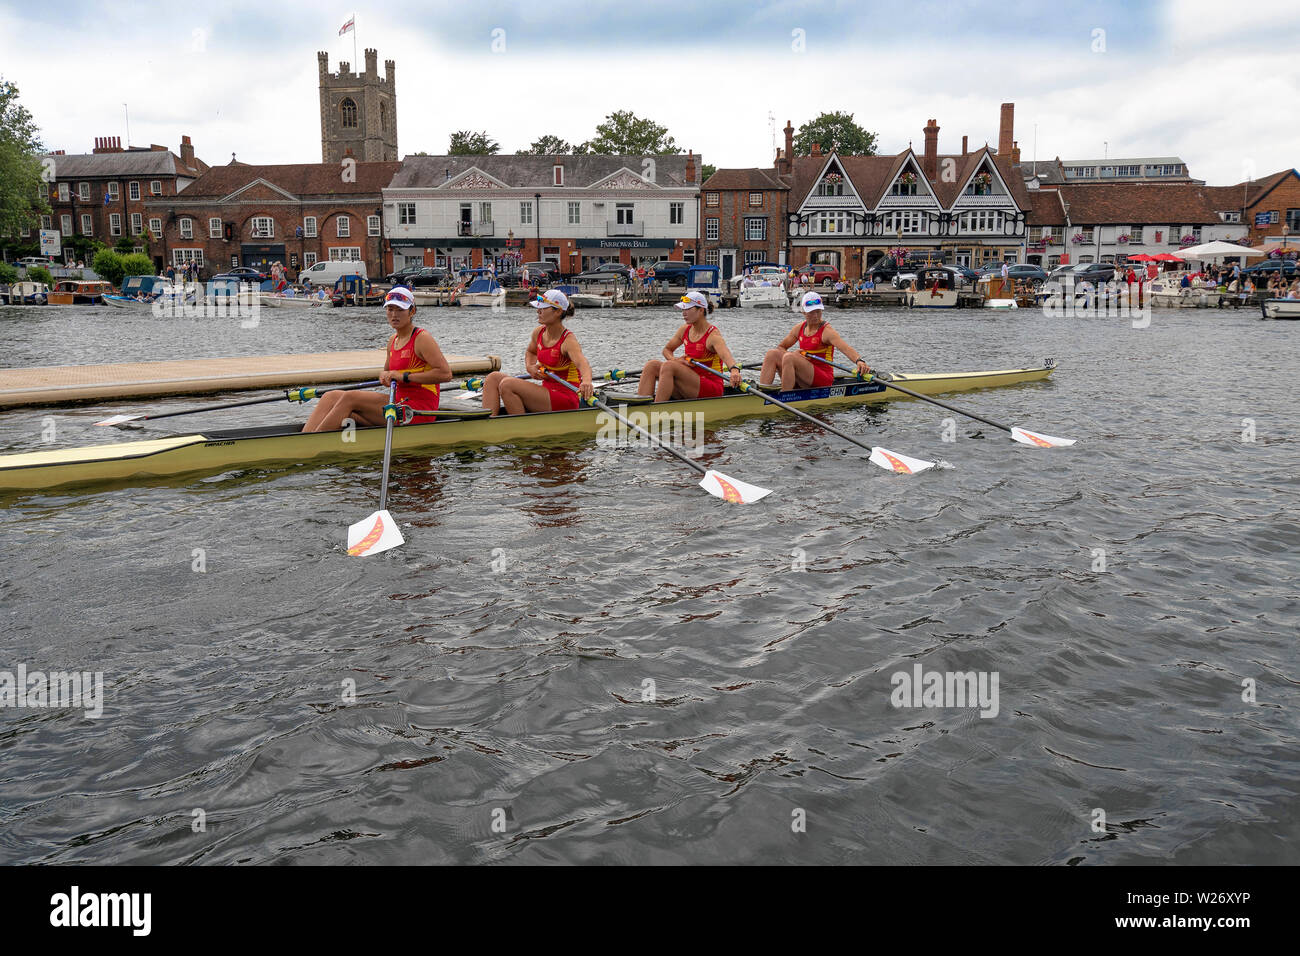 Henley Royal Regatta  Semi Finals  -The Chinese National Rowing Team leave  the pontoon  for  their race in the Princess Grace Challenge Cup semi finals against the  Advanced Rowing Initiative of the Northeast, U.S.A.    Credit Gary Bake/Alamy Live Stock Photo